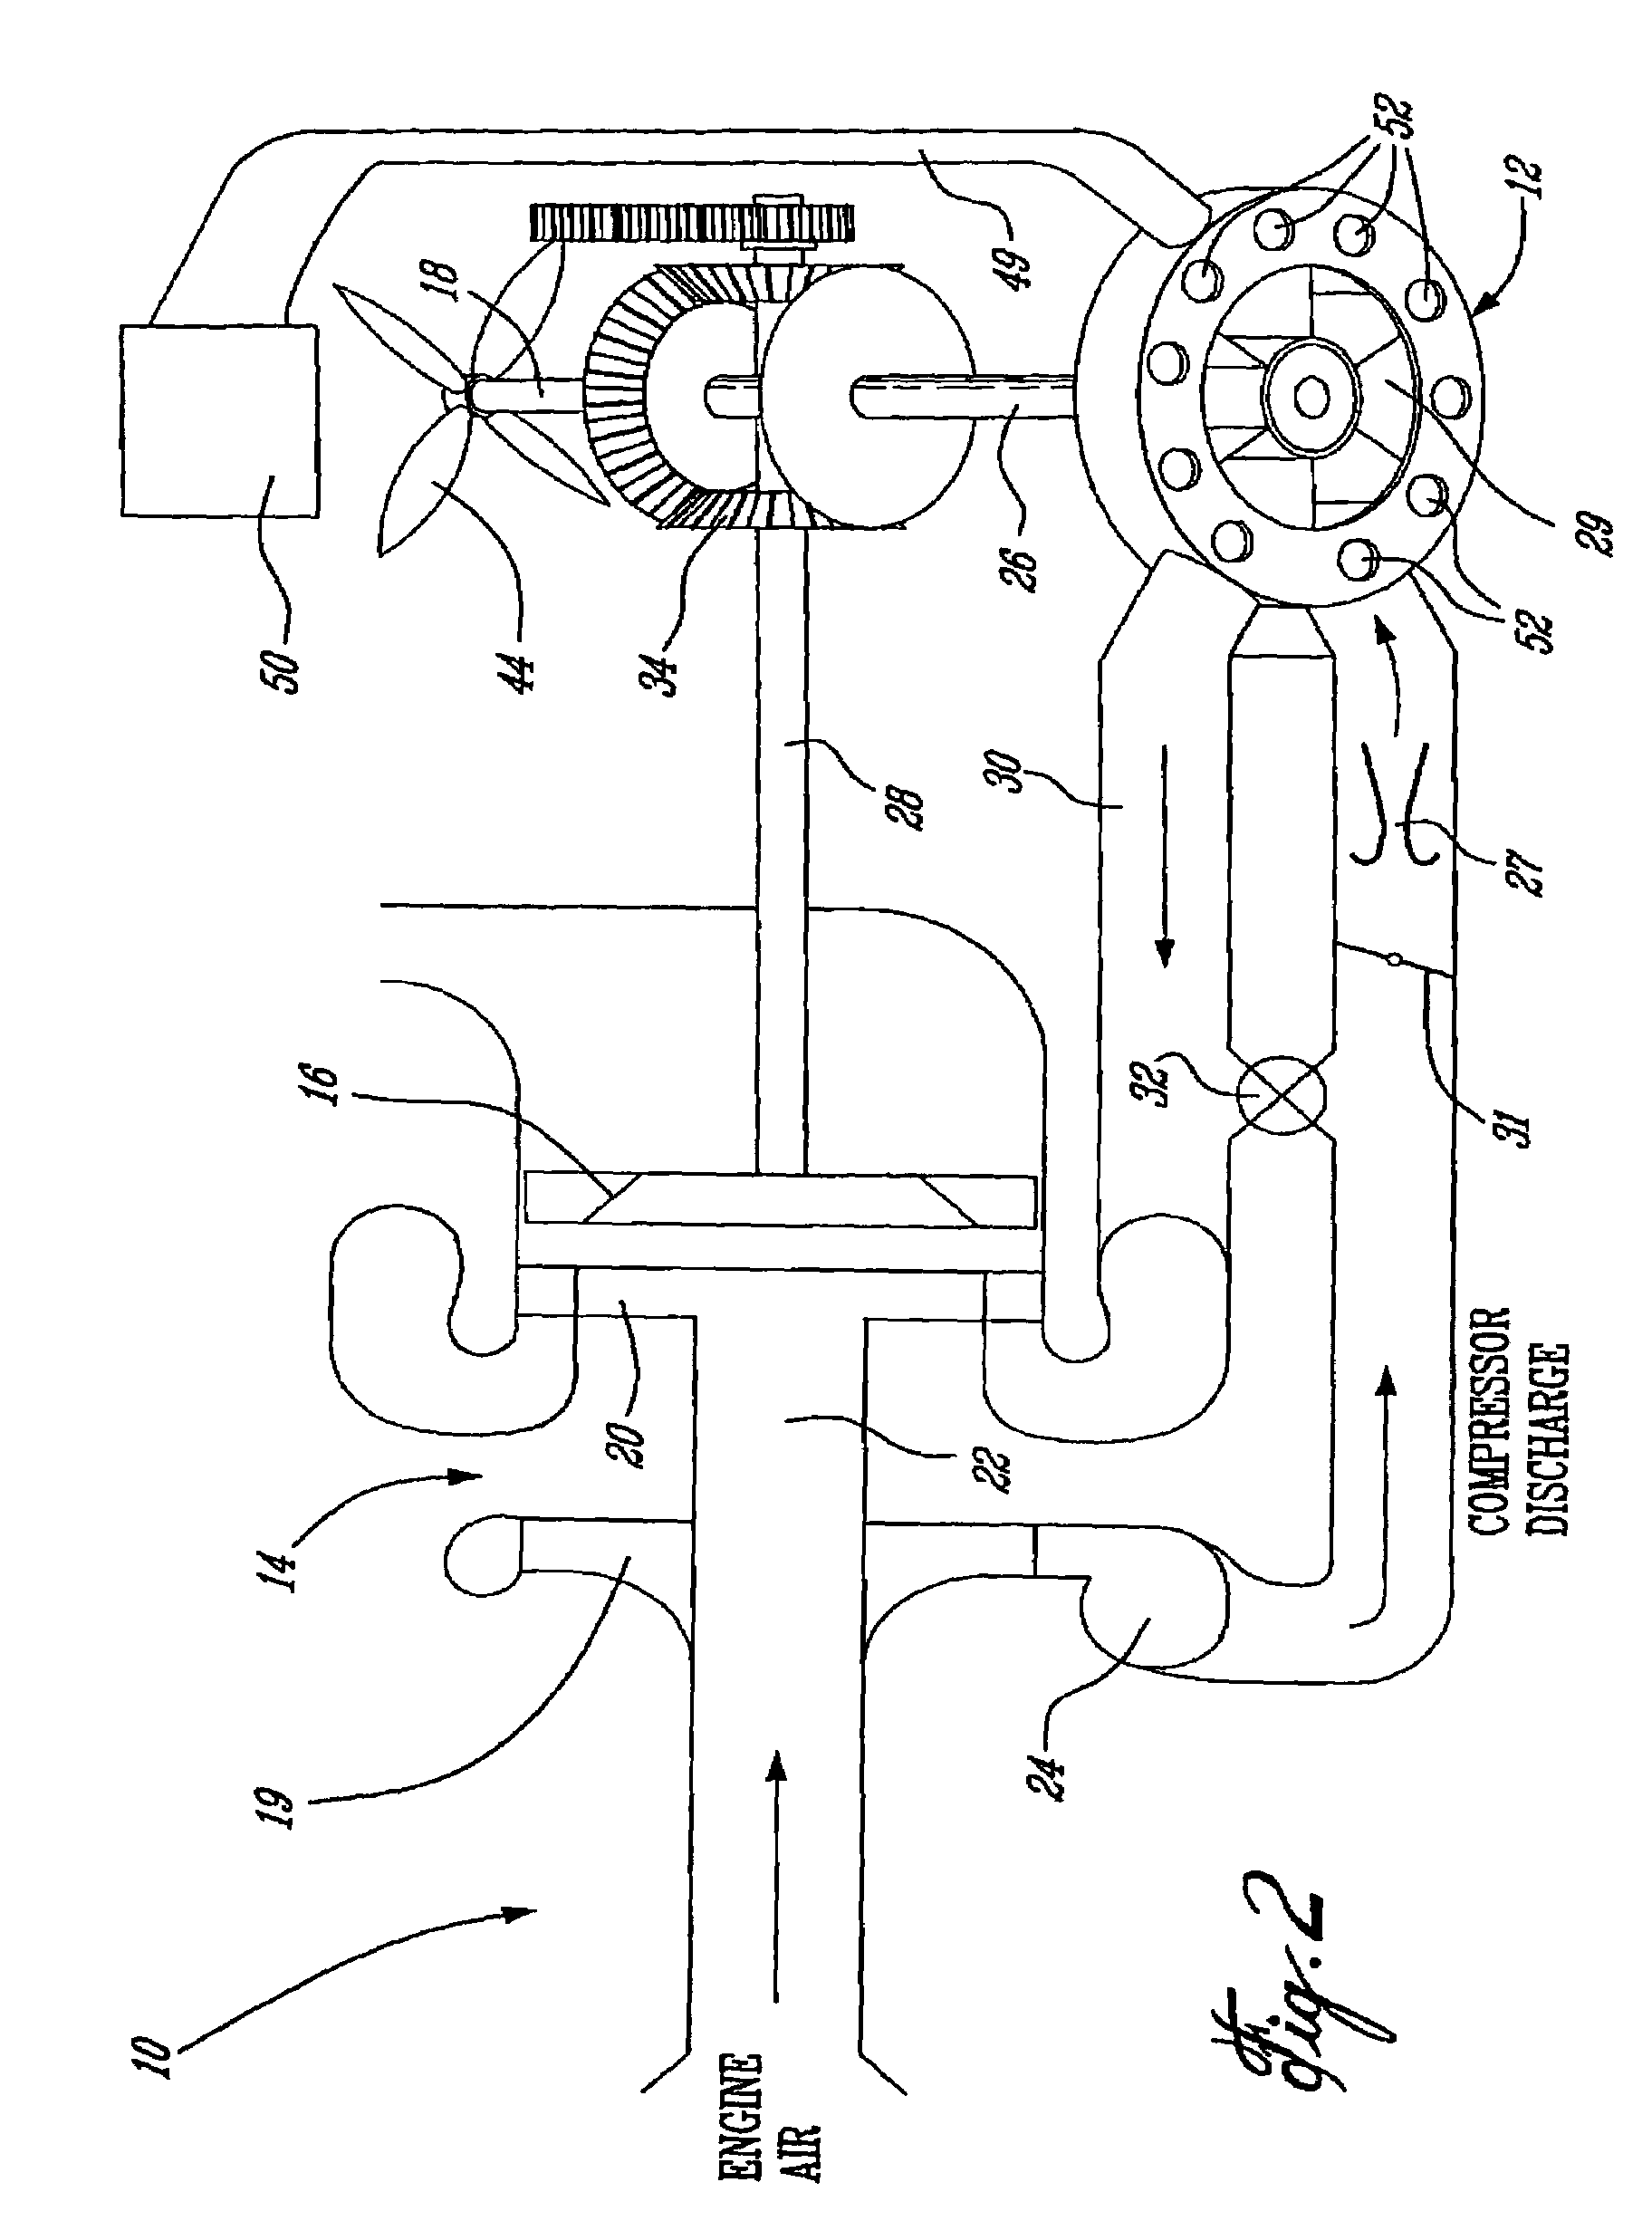 Integral cooling system for rotary engine